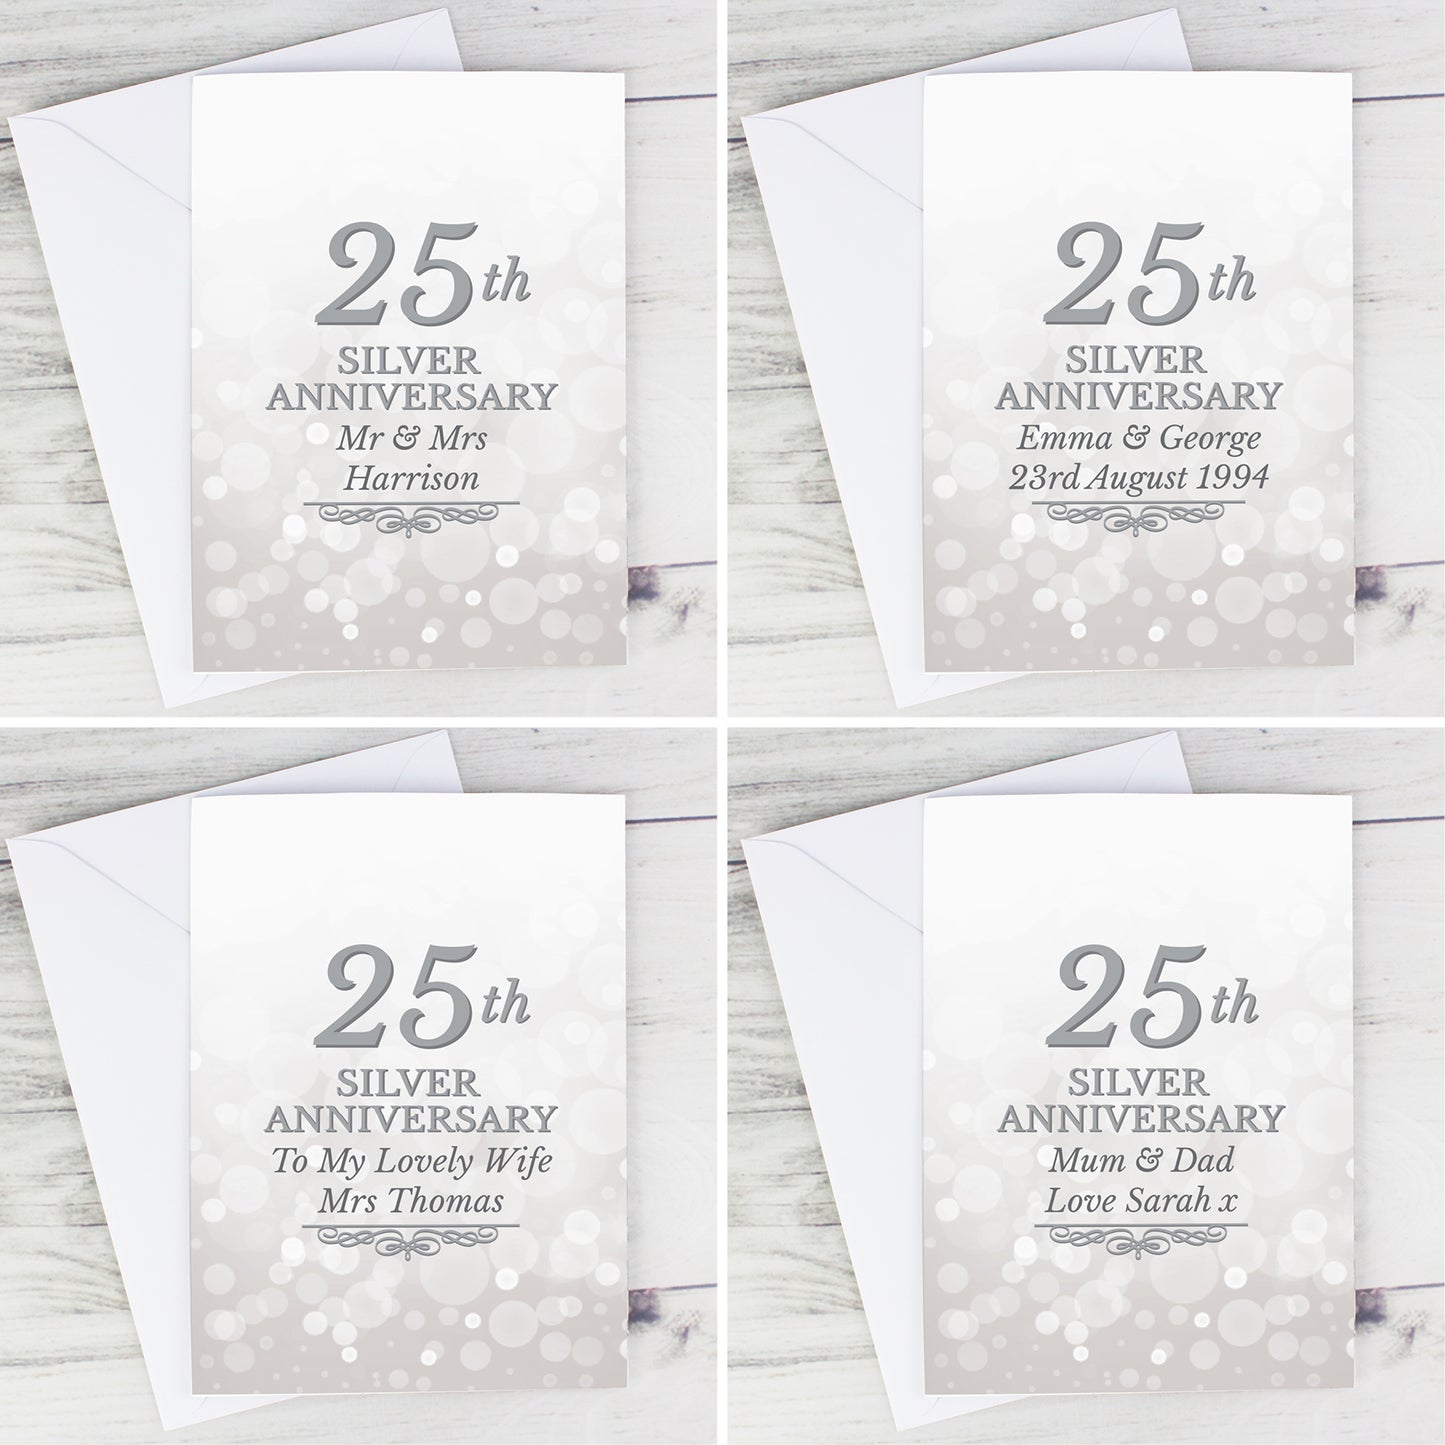 Personalised 25th Silver Anniversary Card Add Any Name - Personalise It!